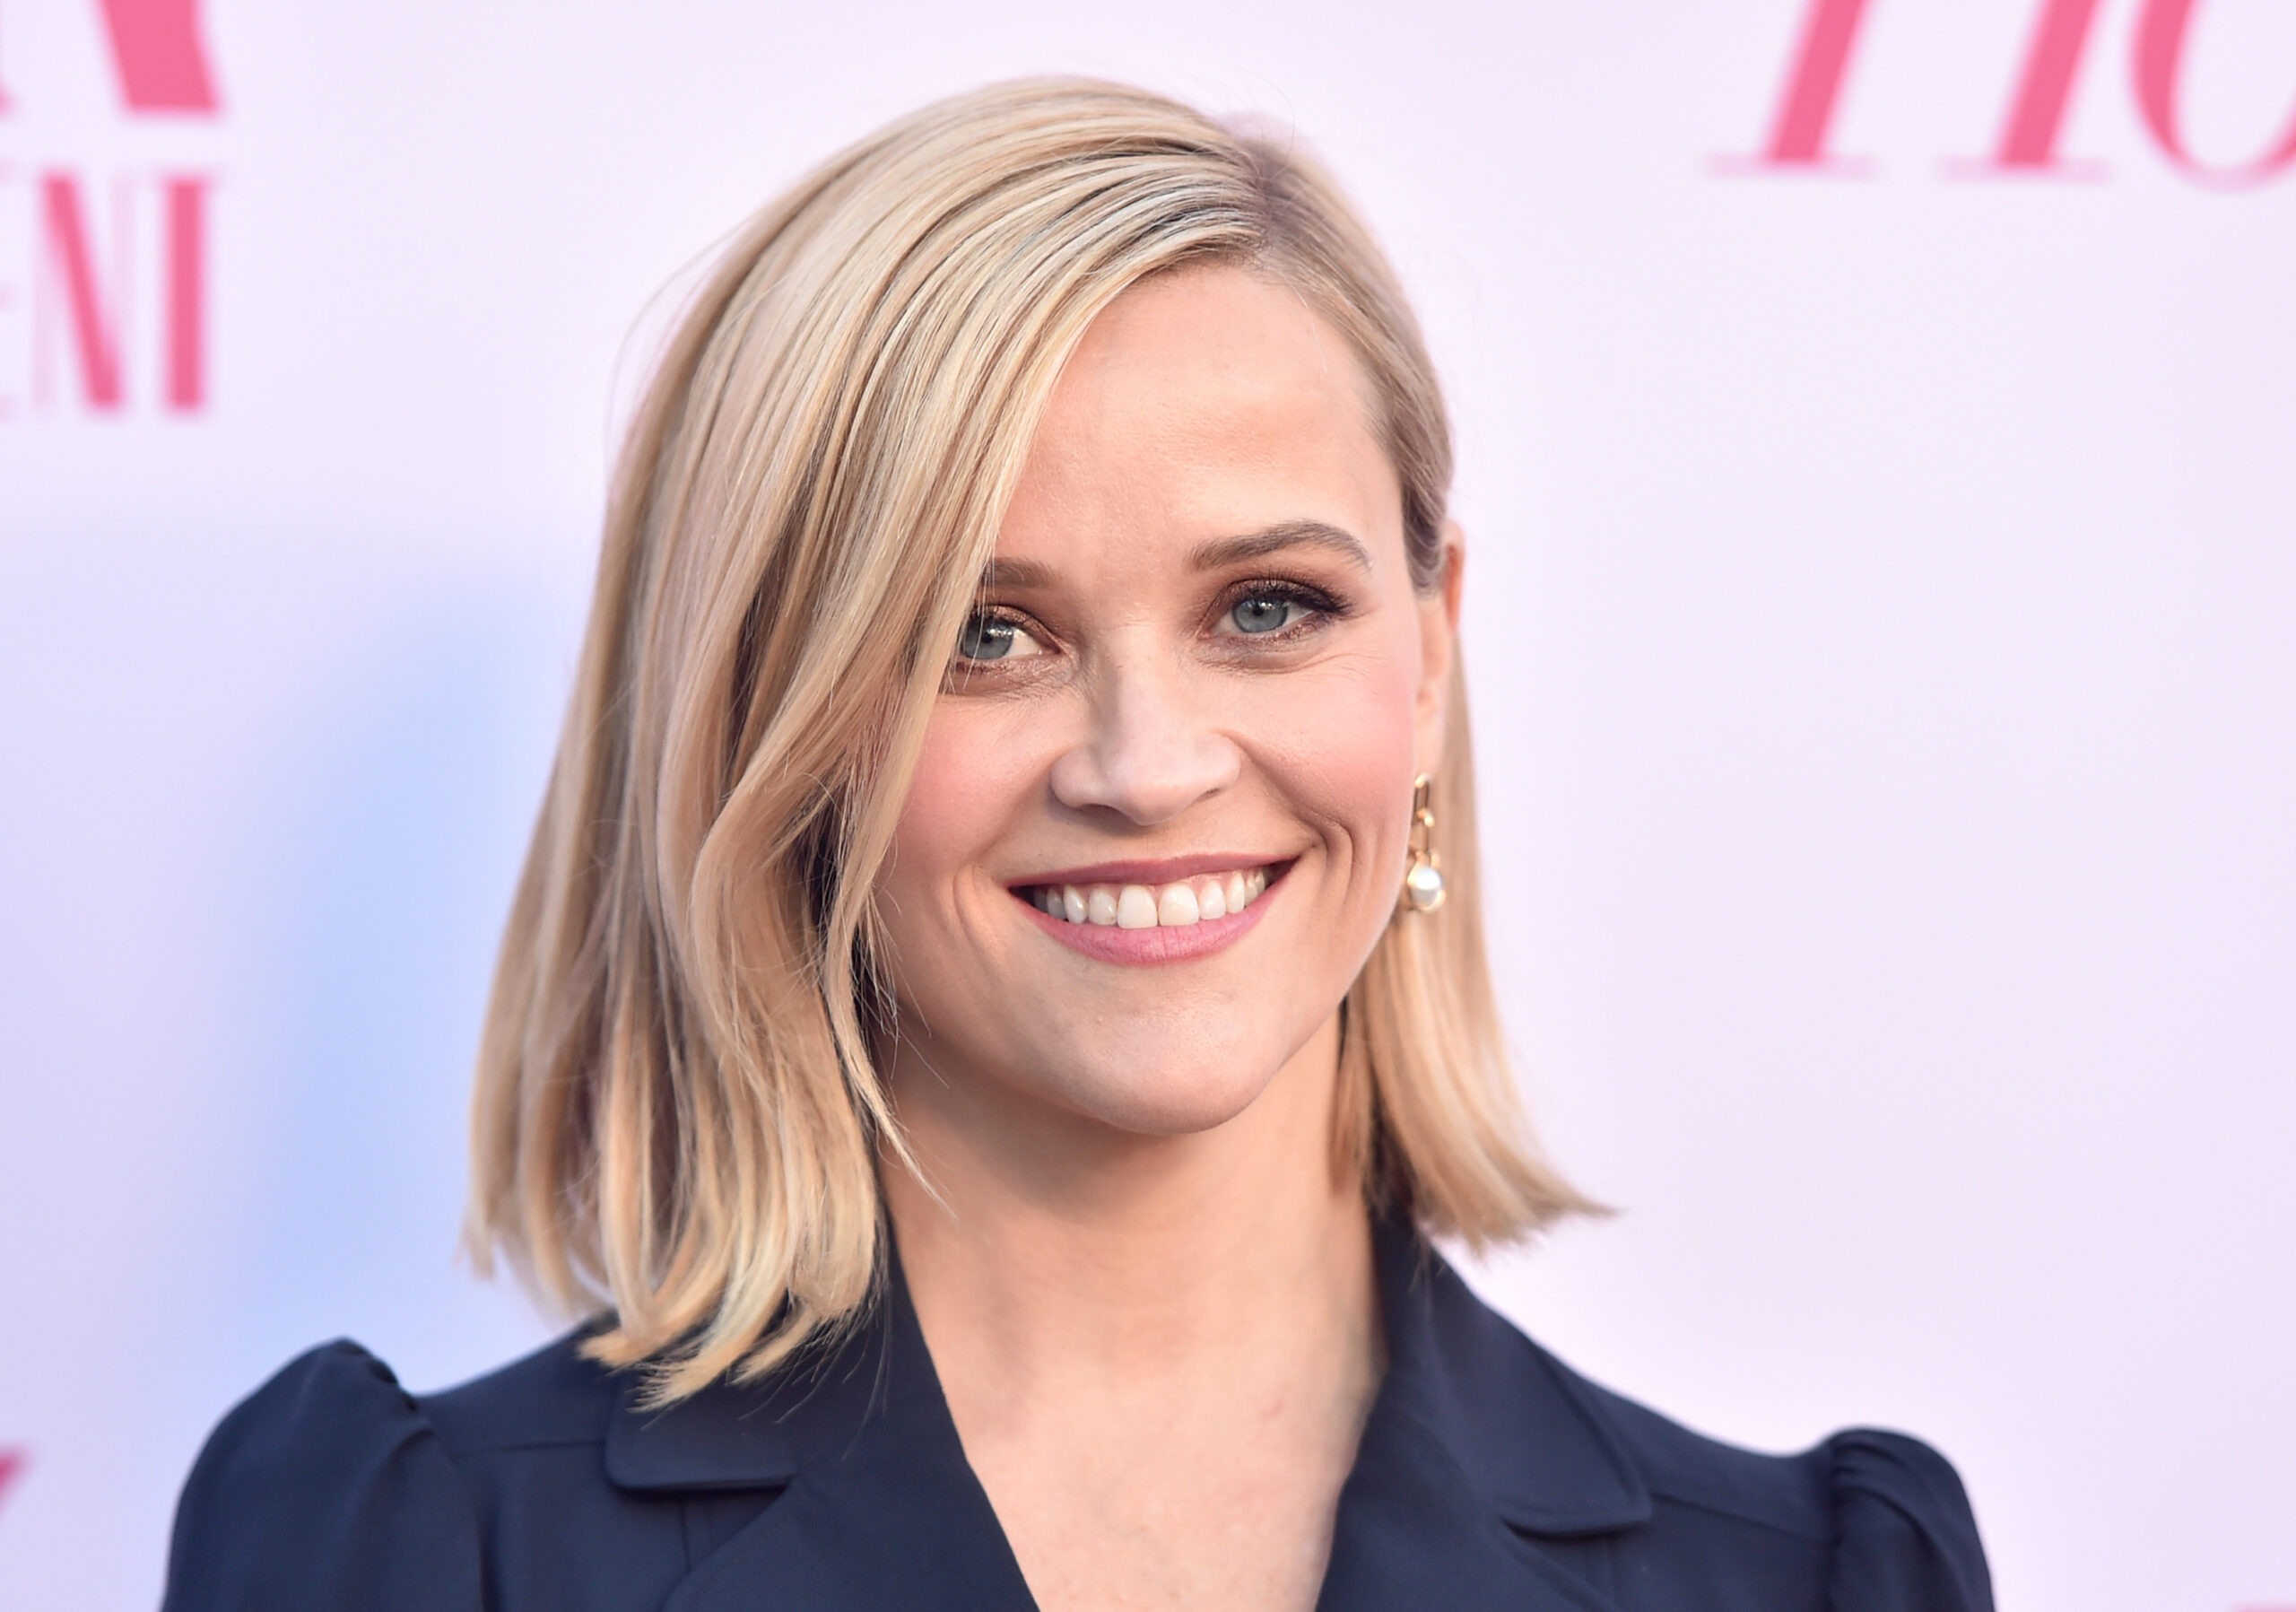 After 12 Years of Marriage, Reese Witherspoon Announces Jim Toth’s Divorce.